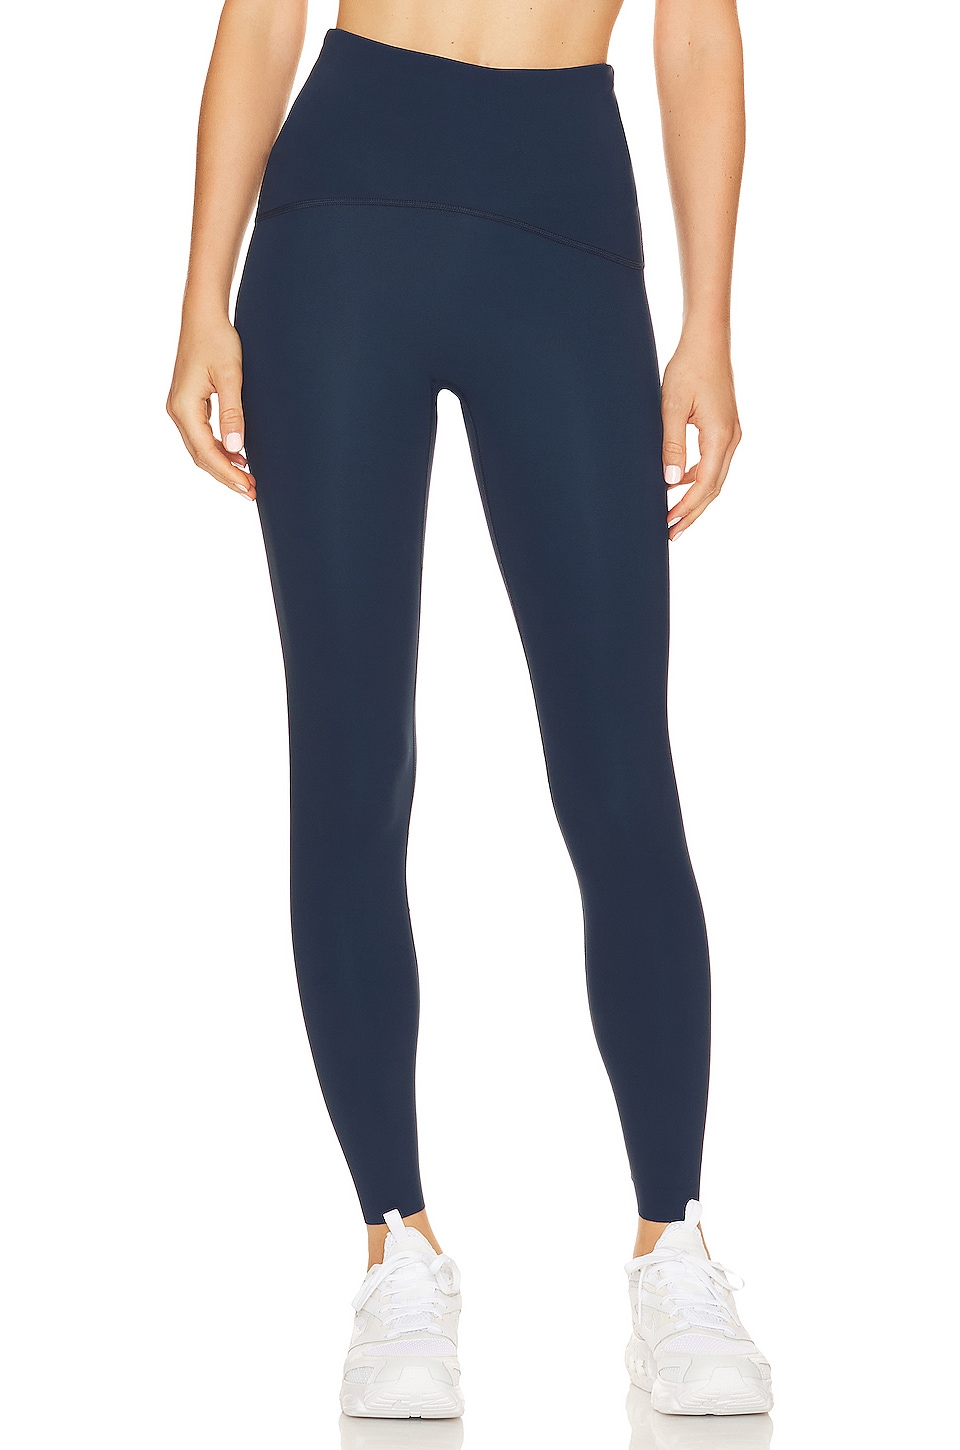 Spanx Booty Boost Active High-rise Stretch Leggings in Black